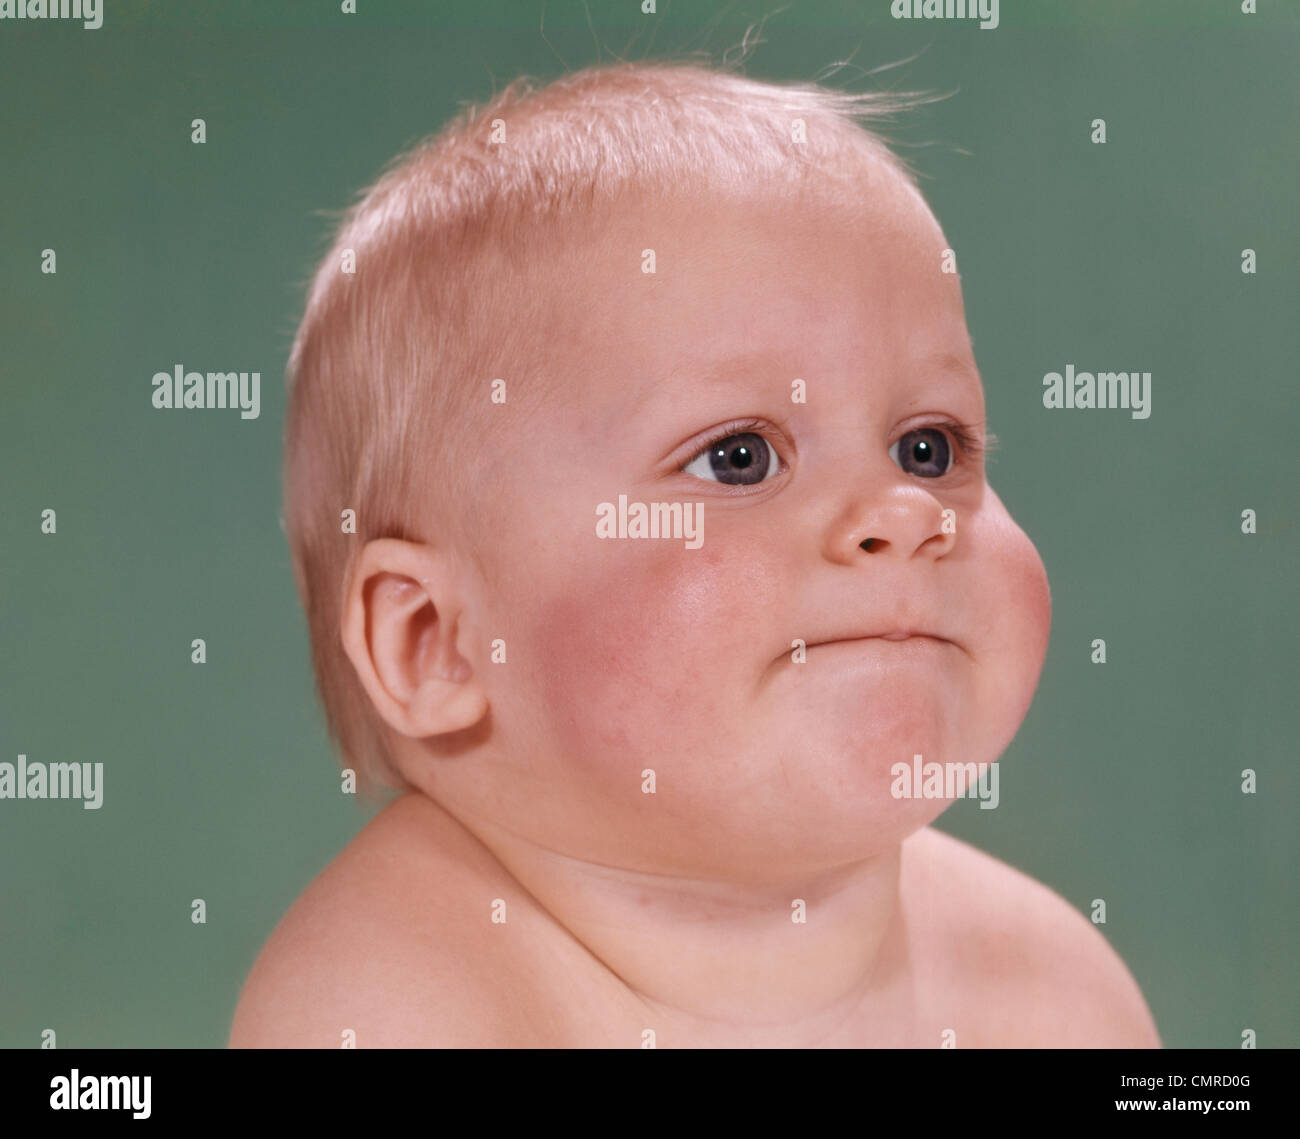 1960s PORTRAIT OF BLOND BABY CHUBBY CHEEKS WITH FUNNY FACE EXPRESSION Stock Photo